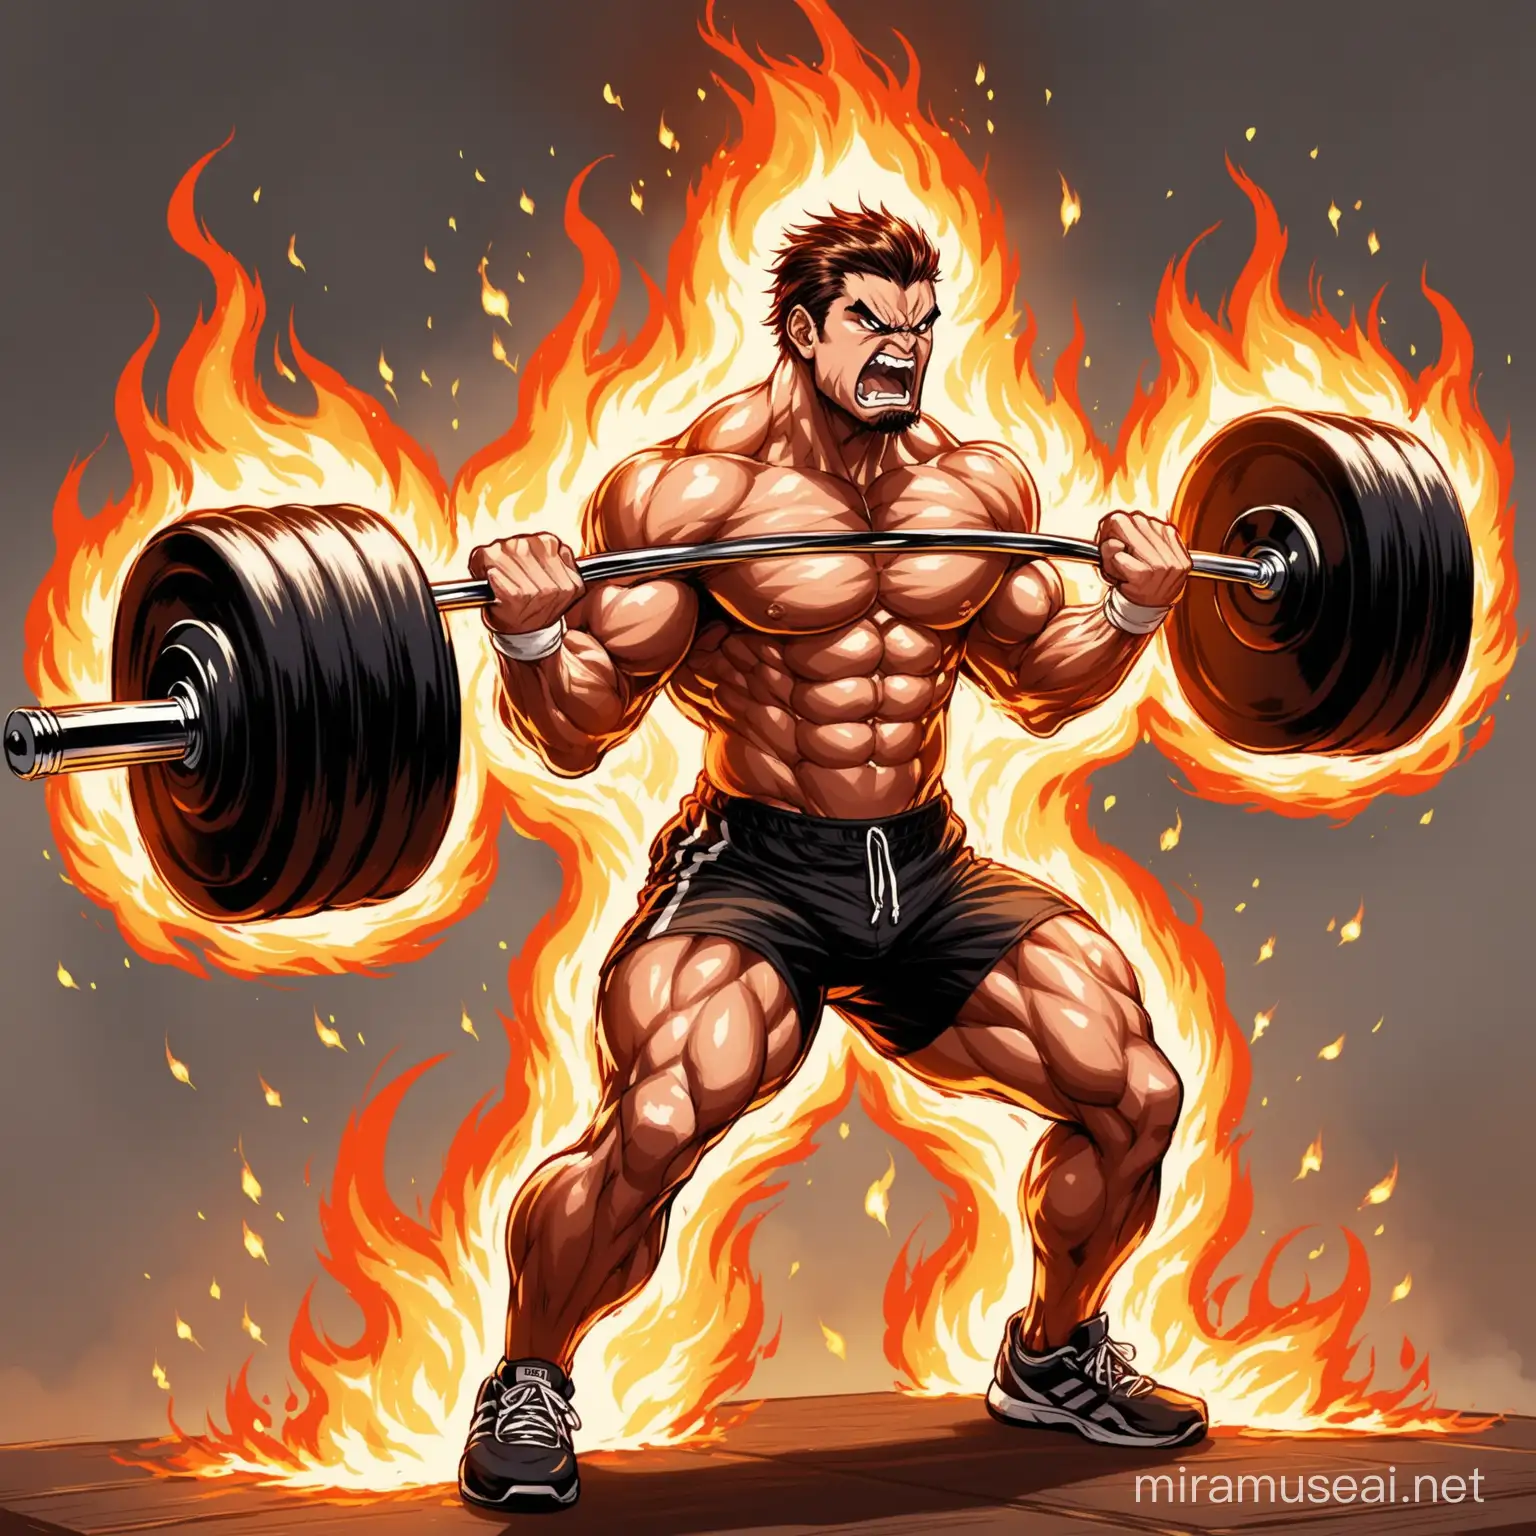 A angry masculine man with burni g desire
 lifting weights or exercising, symbolizing the process of building strength and overcoming physical weaknesses through effort and determination.